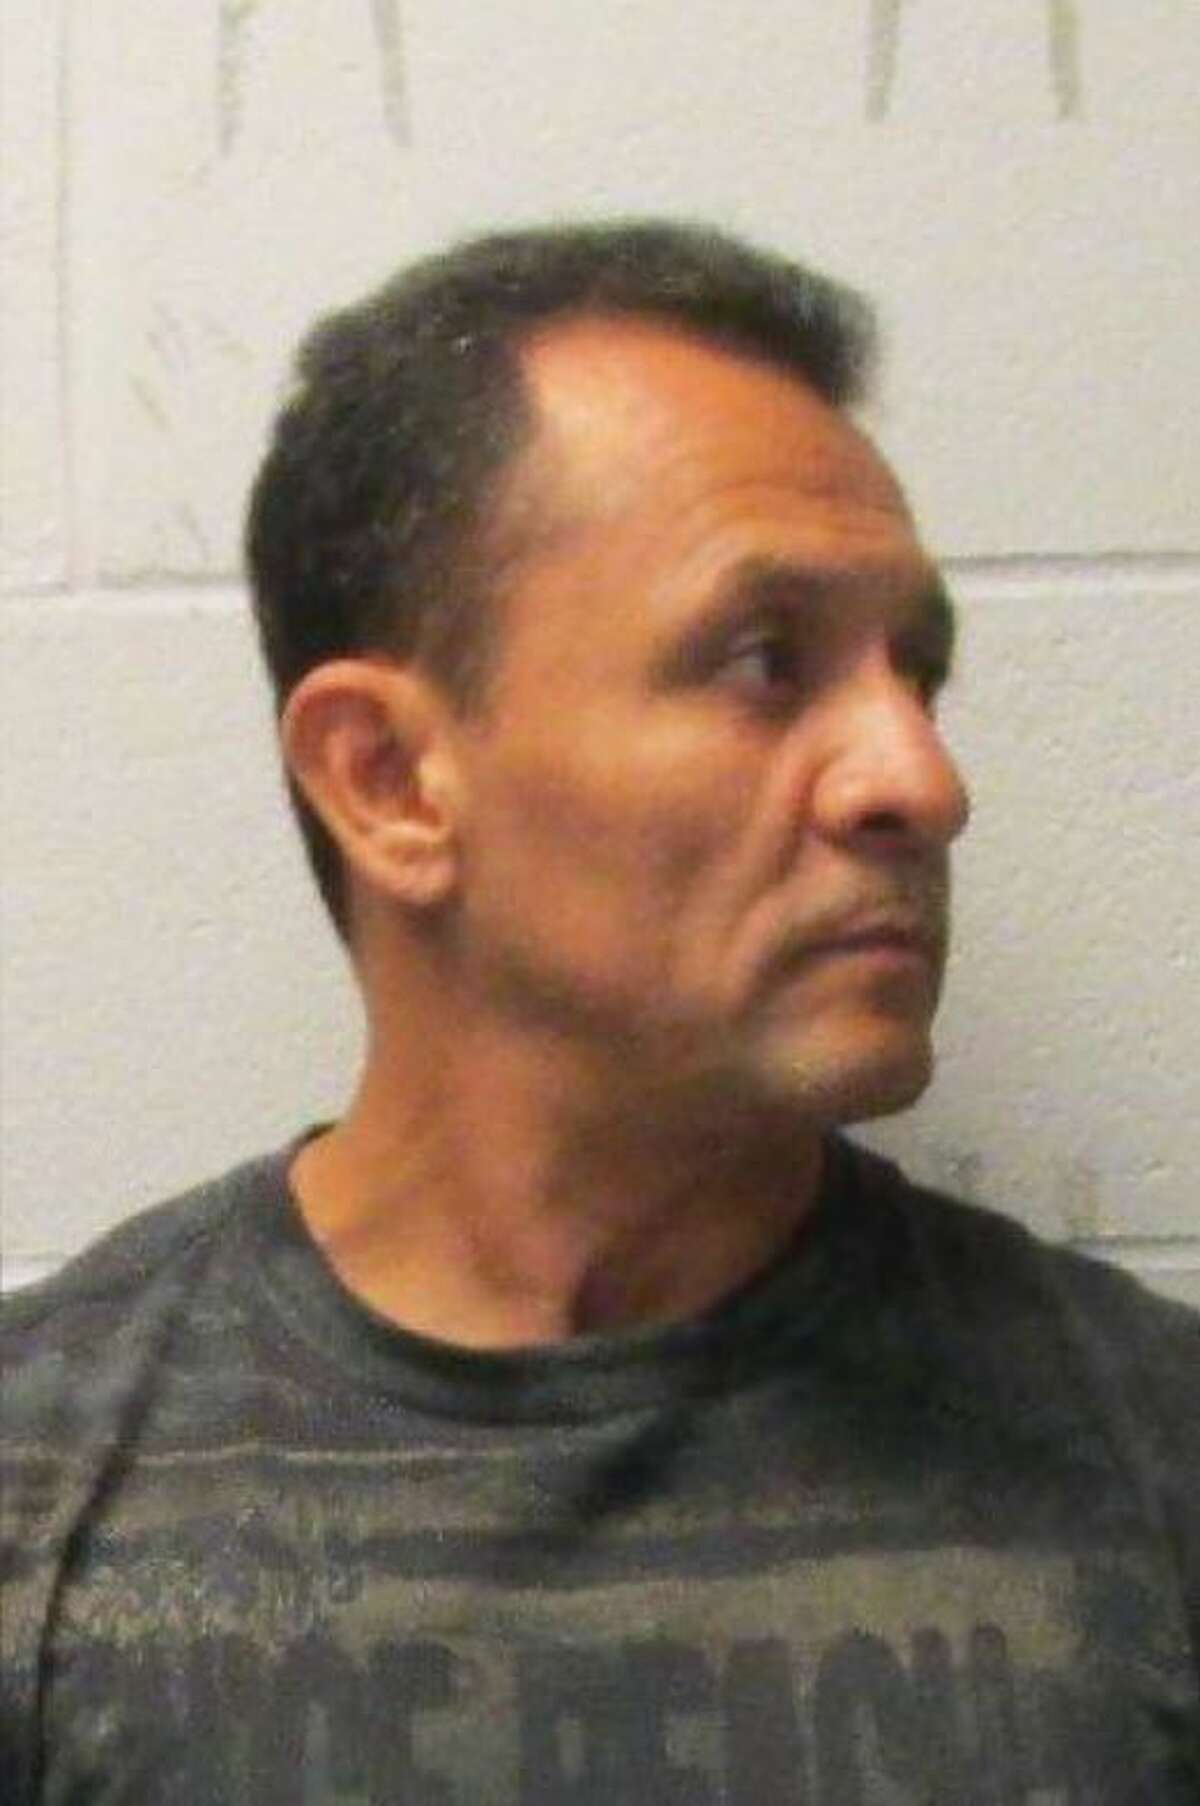 Jorge Alberto Rodriguez, 42, was booked into jail on Thursday on four charges of aggravated sexual assault of a child, six counts of possession of child pornography and five counts of sexual performance by a child. He is being held on a $9.3 million bond.